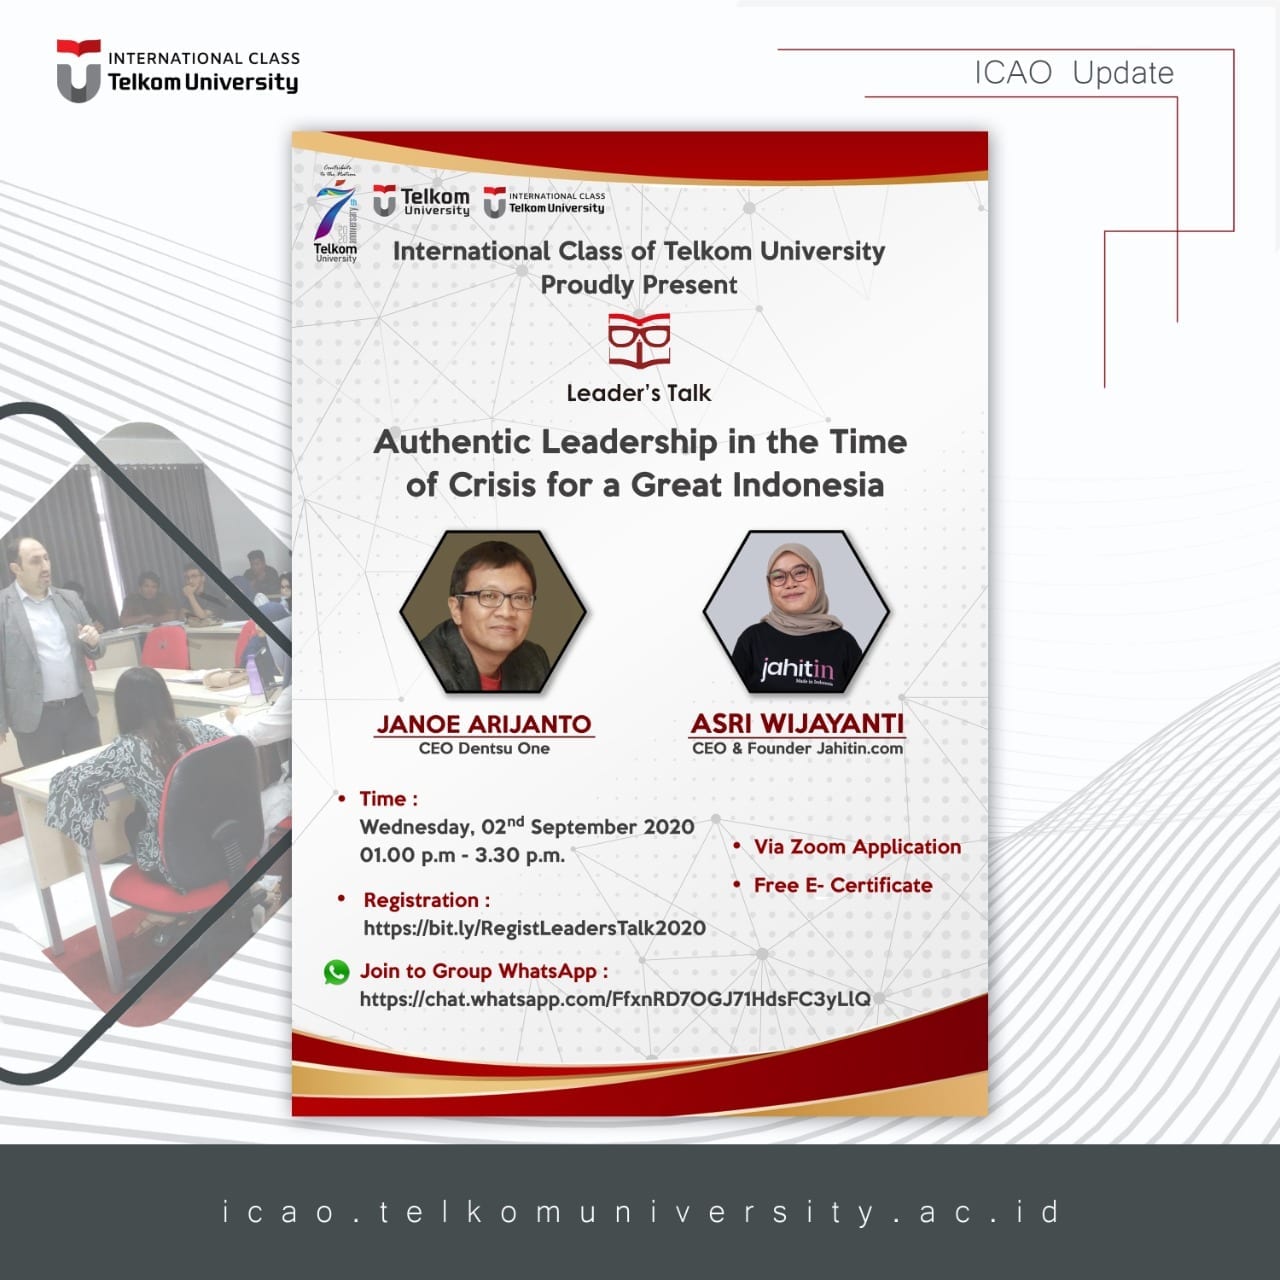 Leader’s Talk Series ep. 21 Day 1 & ep. 22 Day 2: Authentic Leadership in the Time of Crisis for A Great Indonesia